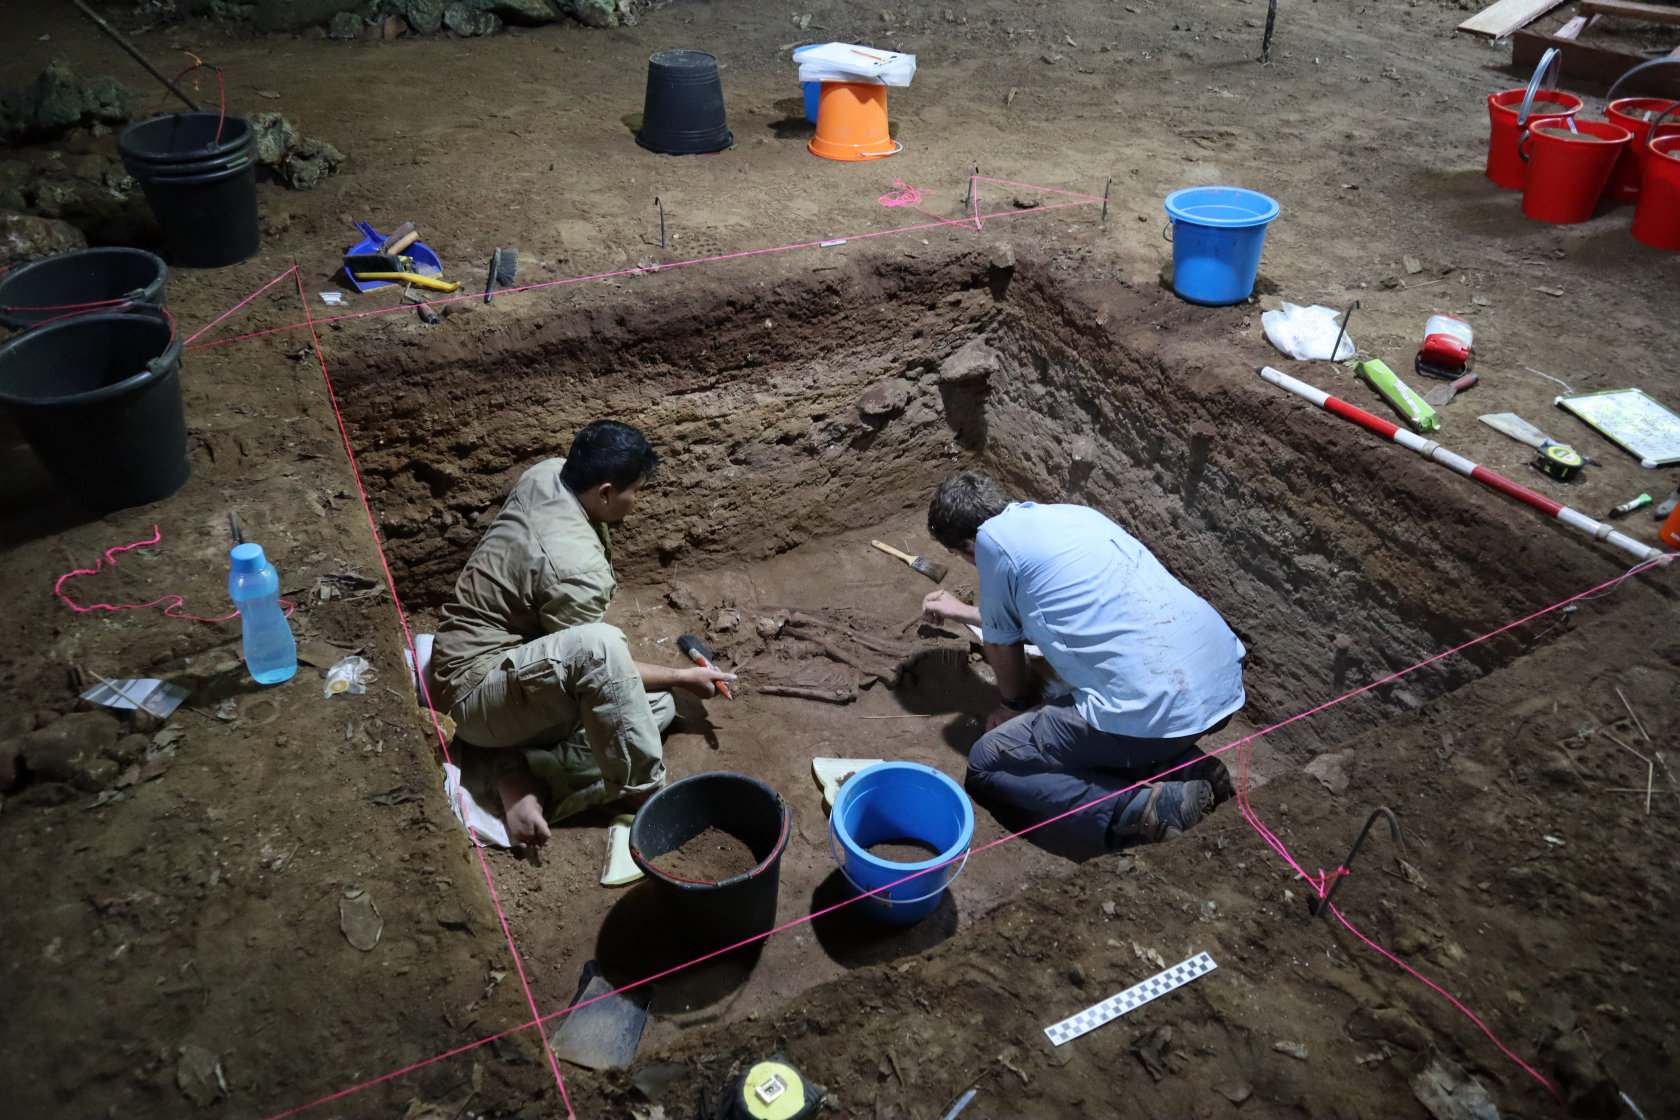 Archaeologists at work in Liang Tebo cave in the remote Sangkulirang-Mangkalihat region of East Kalimantan. Photograph: Tim Maloney